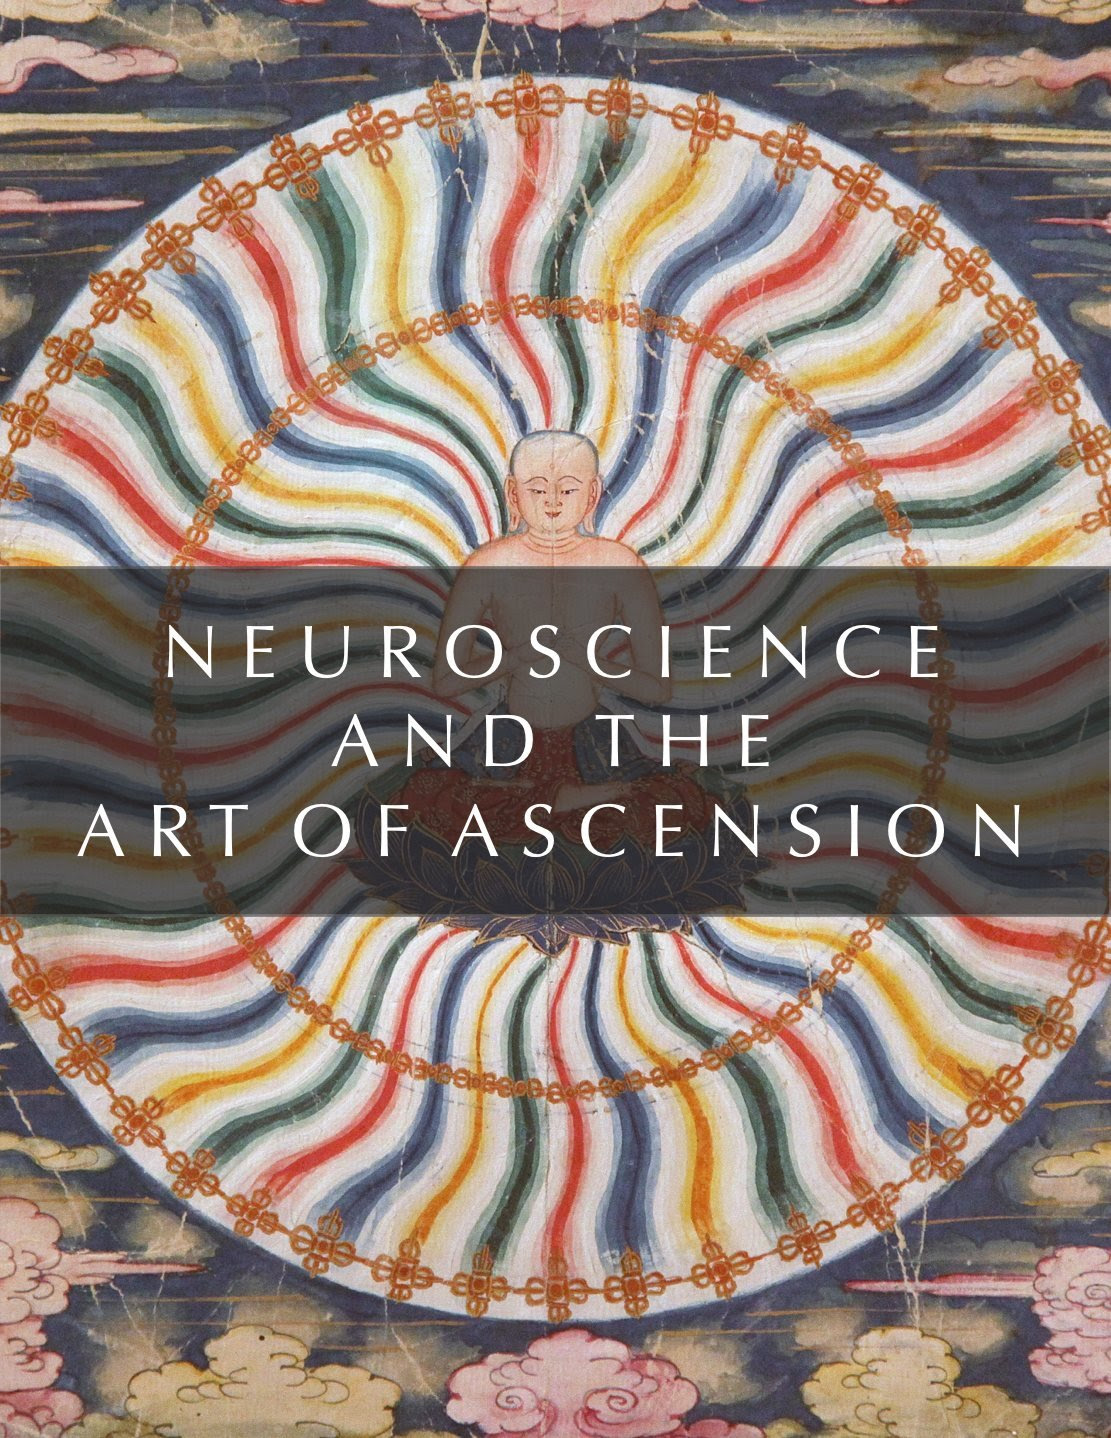 NEUROSCIENCE-AND-THE-ART-OF-ASCENSION